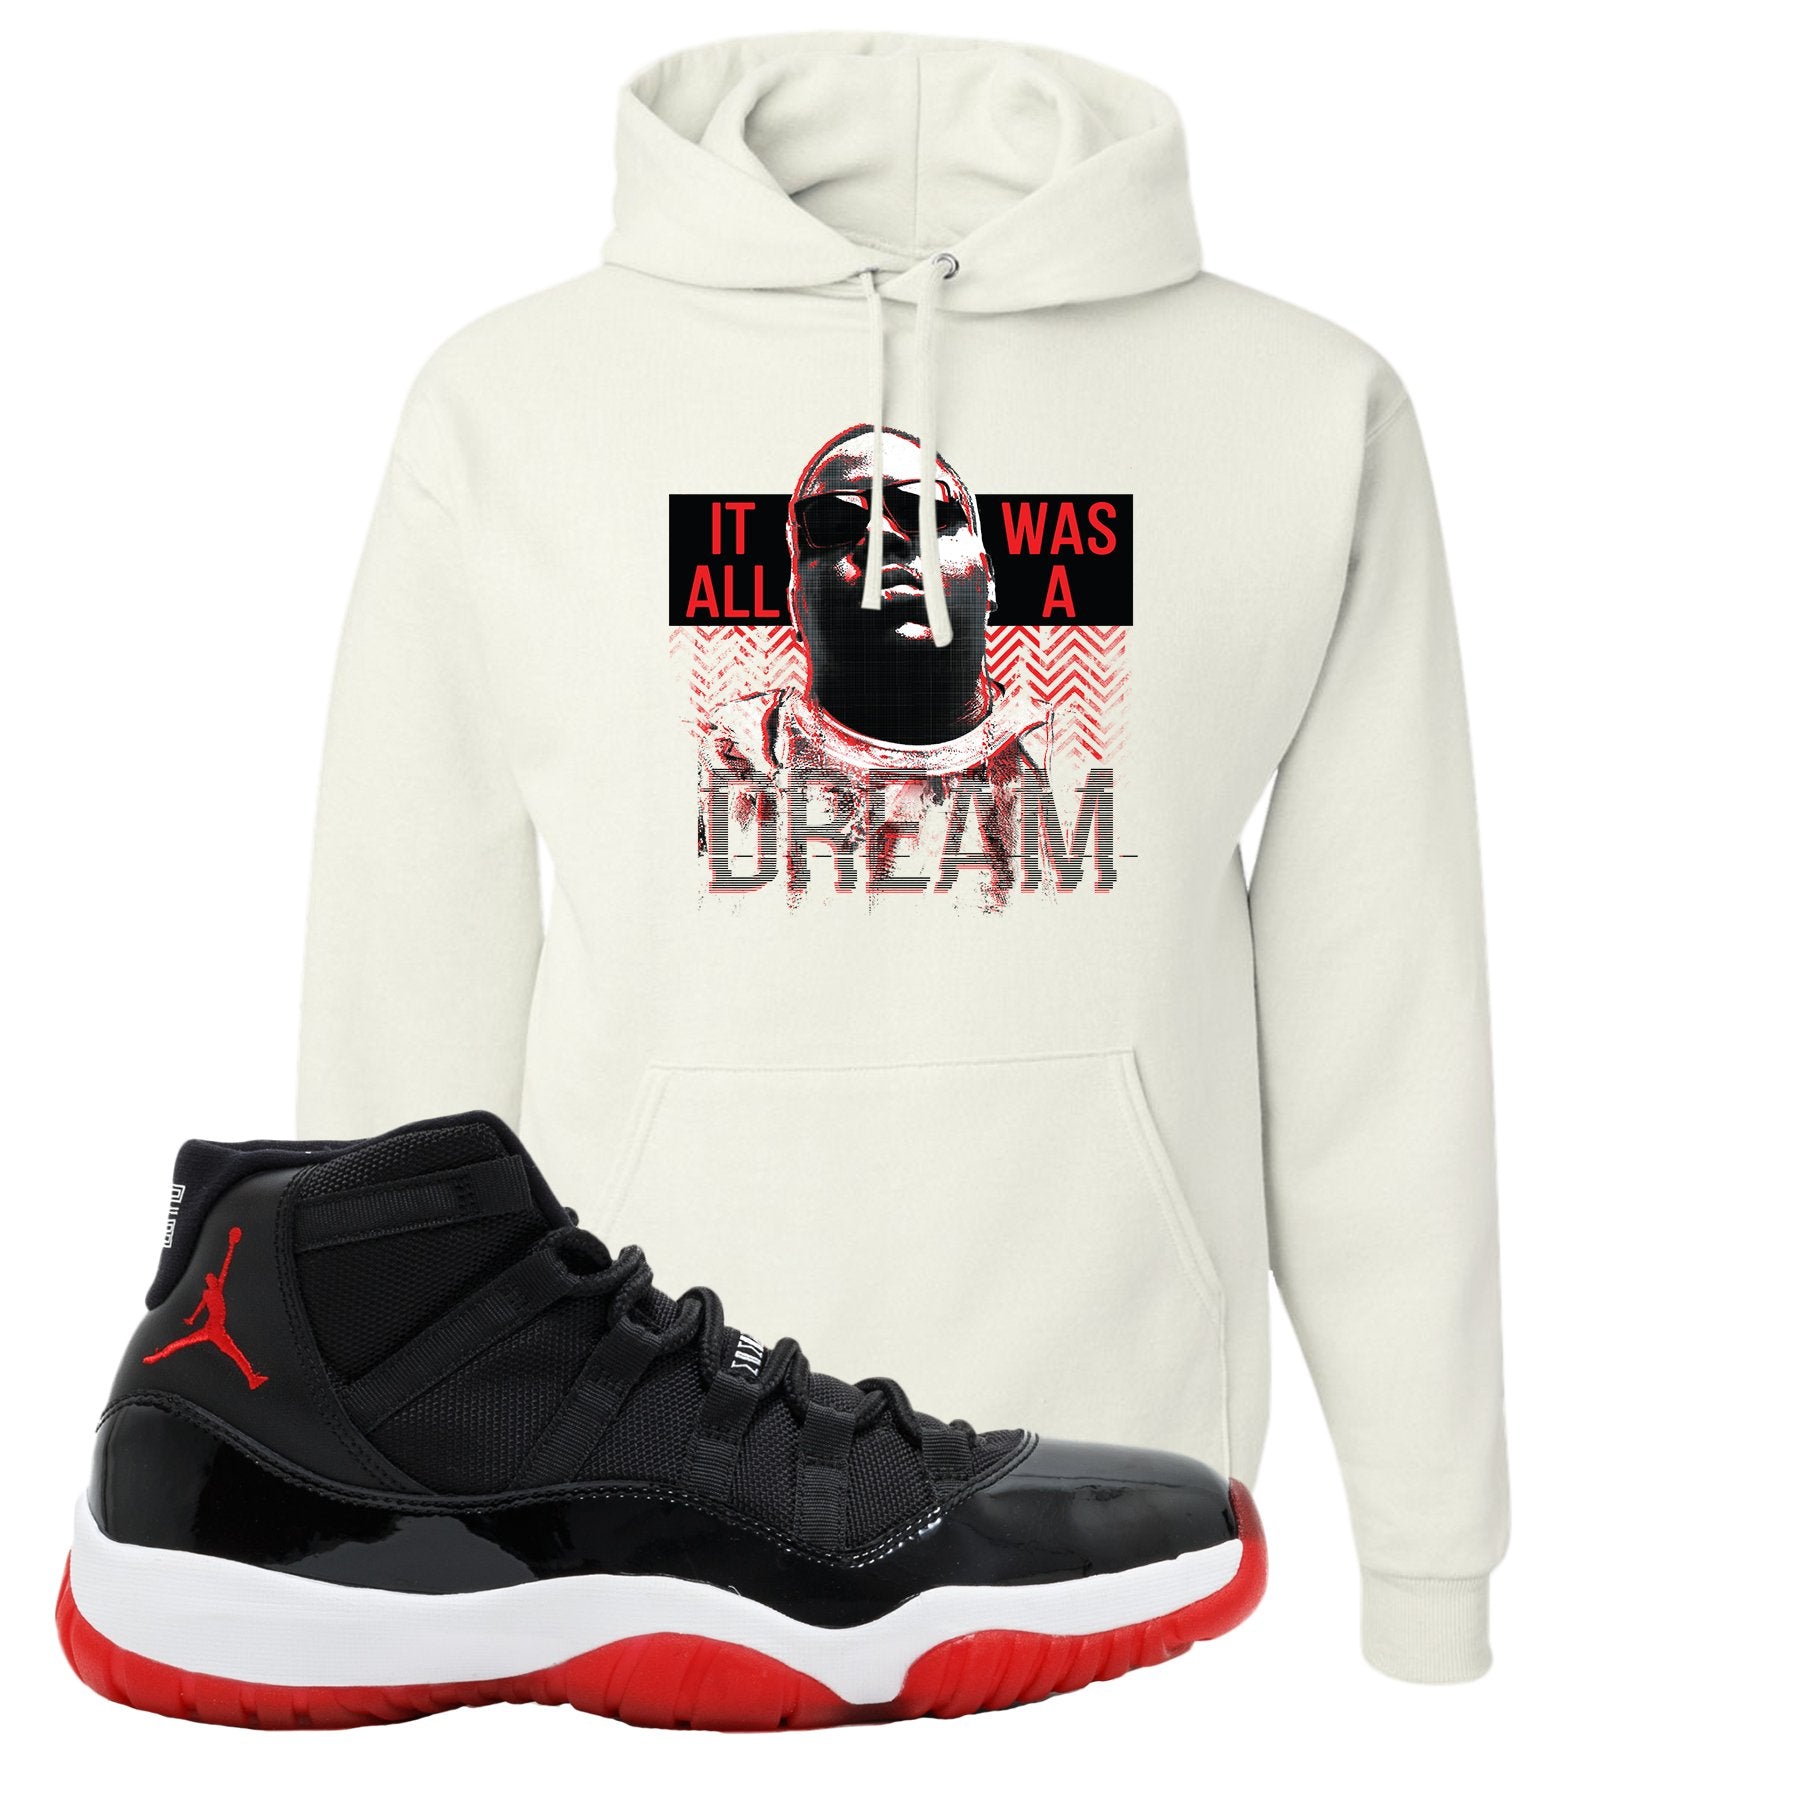 Jordan 11 Bred It Was All A Dream White Sneaker Hook Up Pullover Hoodie